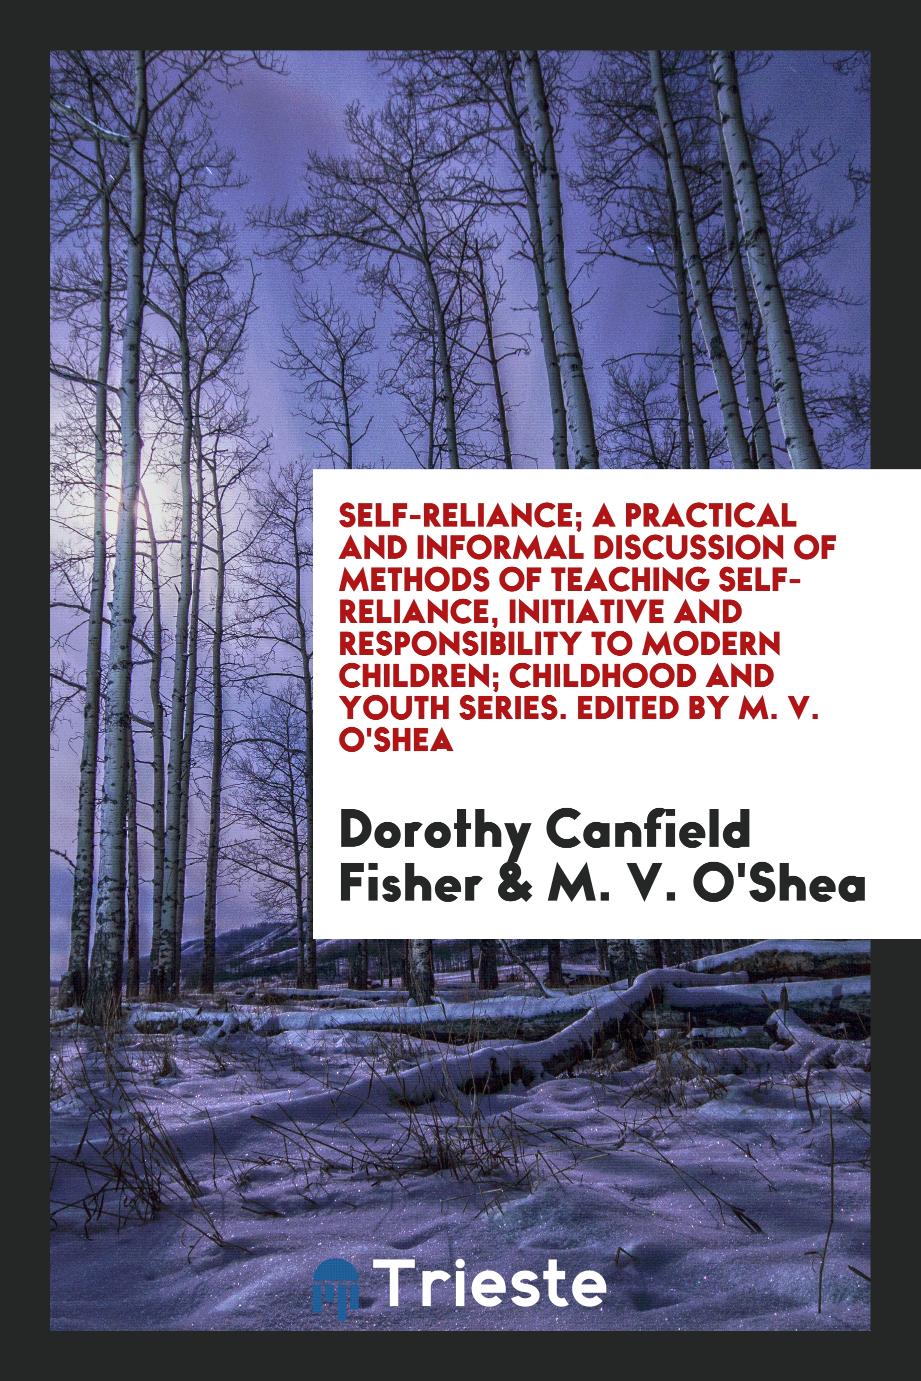 Self-Reliance; A Practical and Informal Discussion of Methods of Teaching Self-Reliance, Initiative and Responsibility to Modern Children; Childhood and Youth Series. Edited by M. V. O'Shea